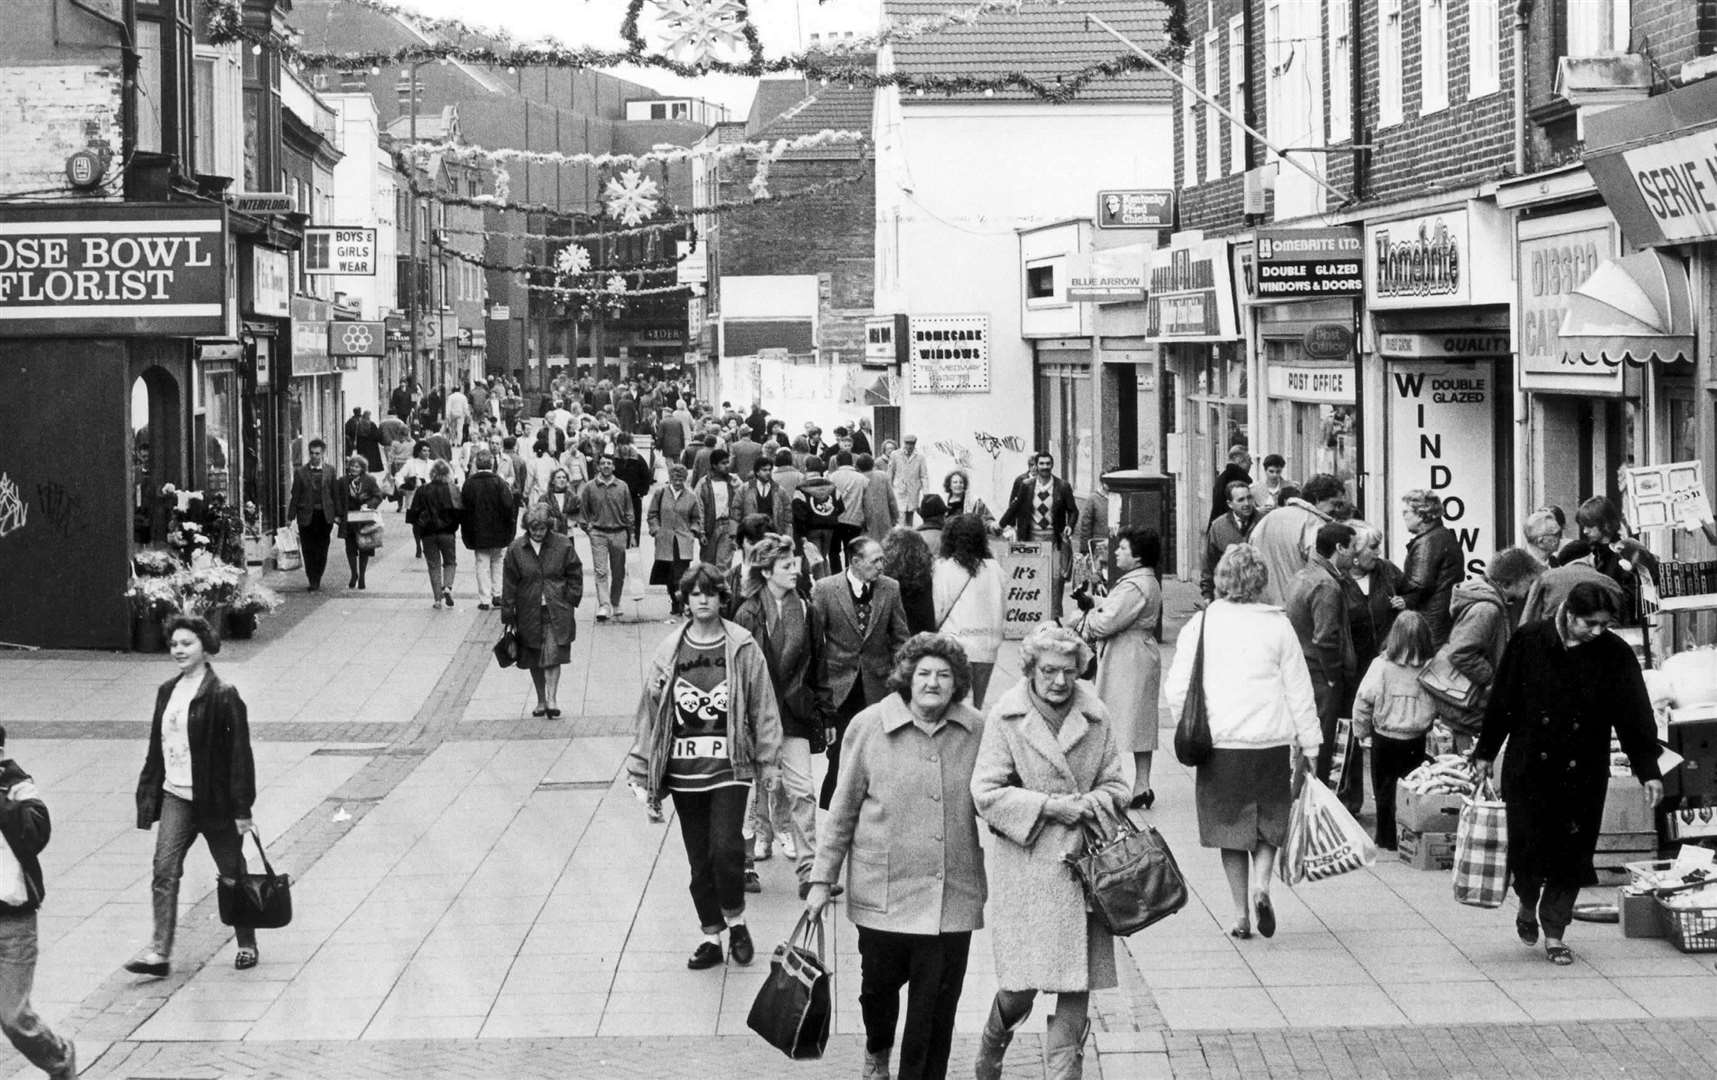 Chatham High Street pictured in 1989